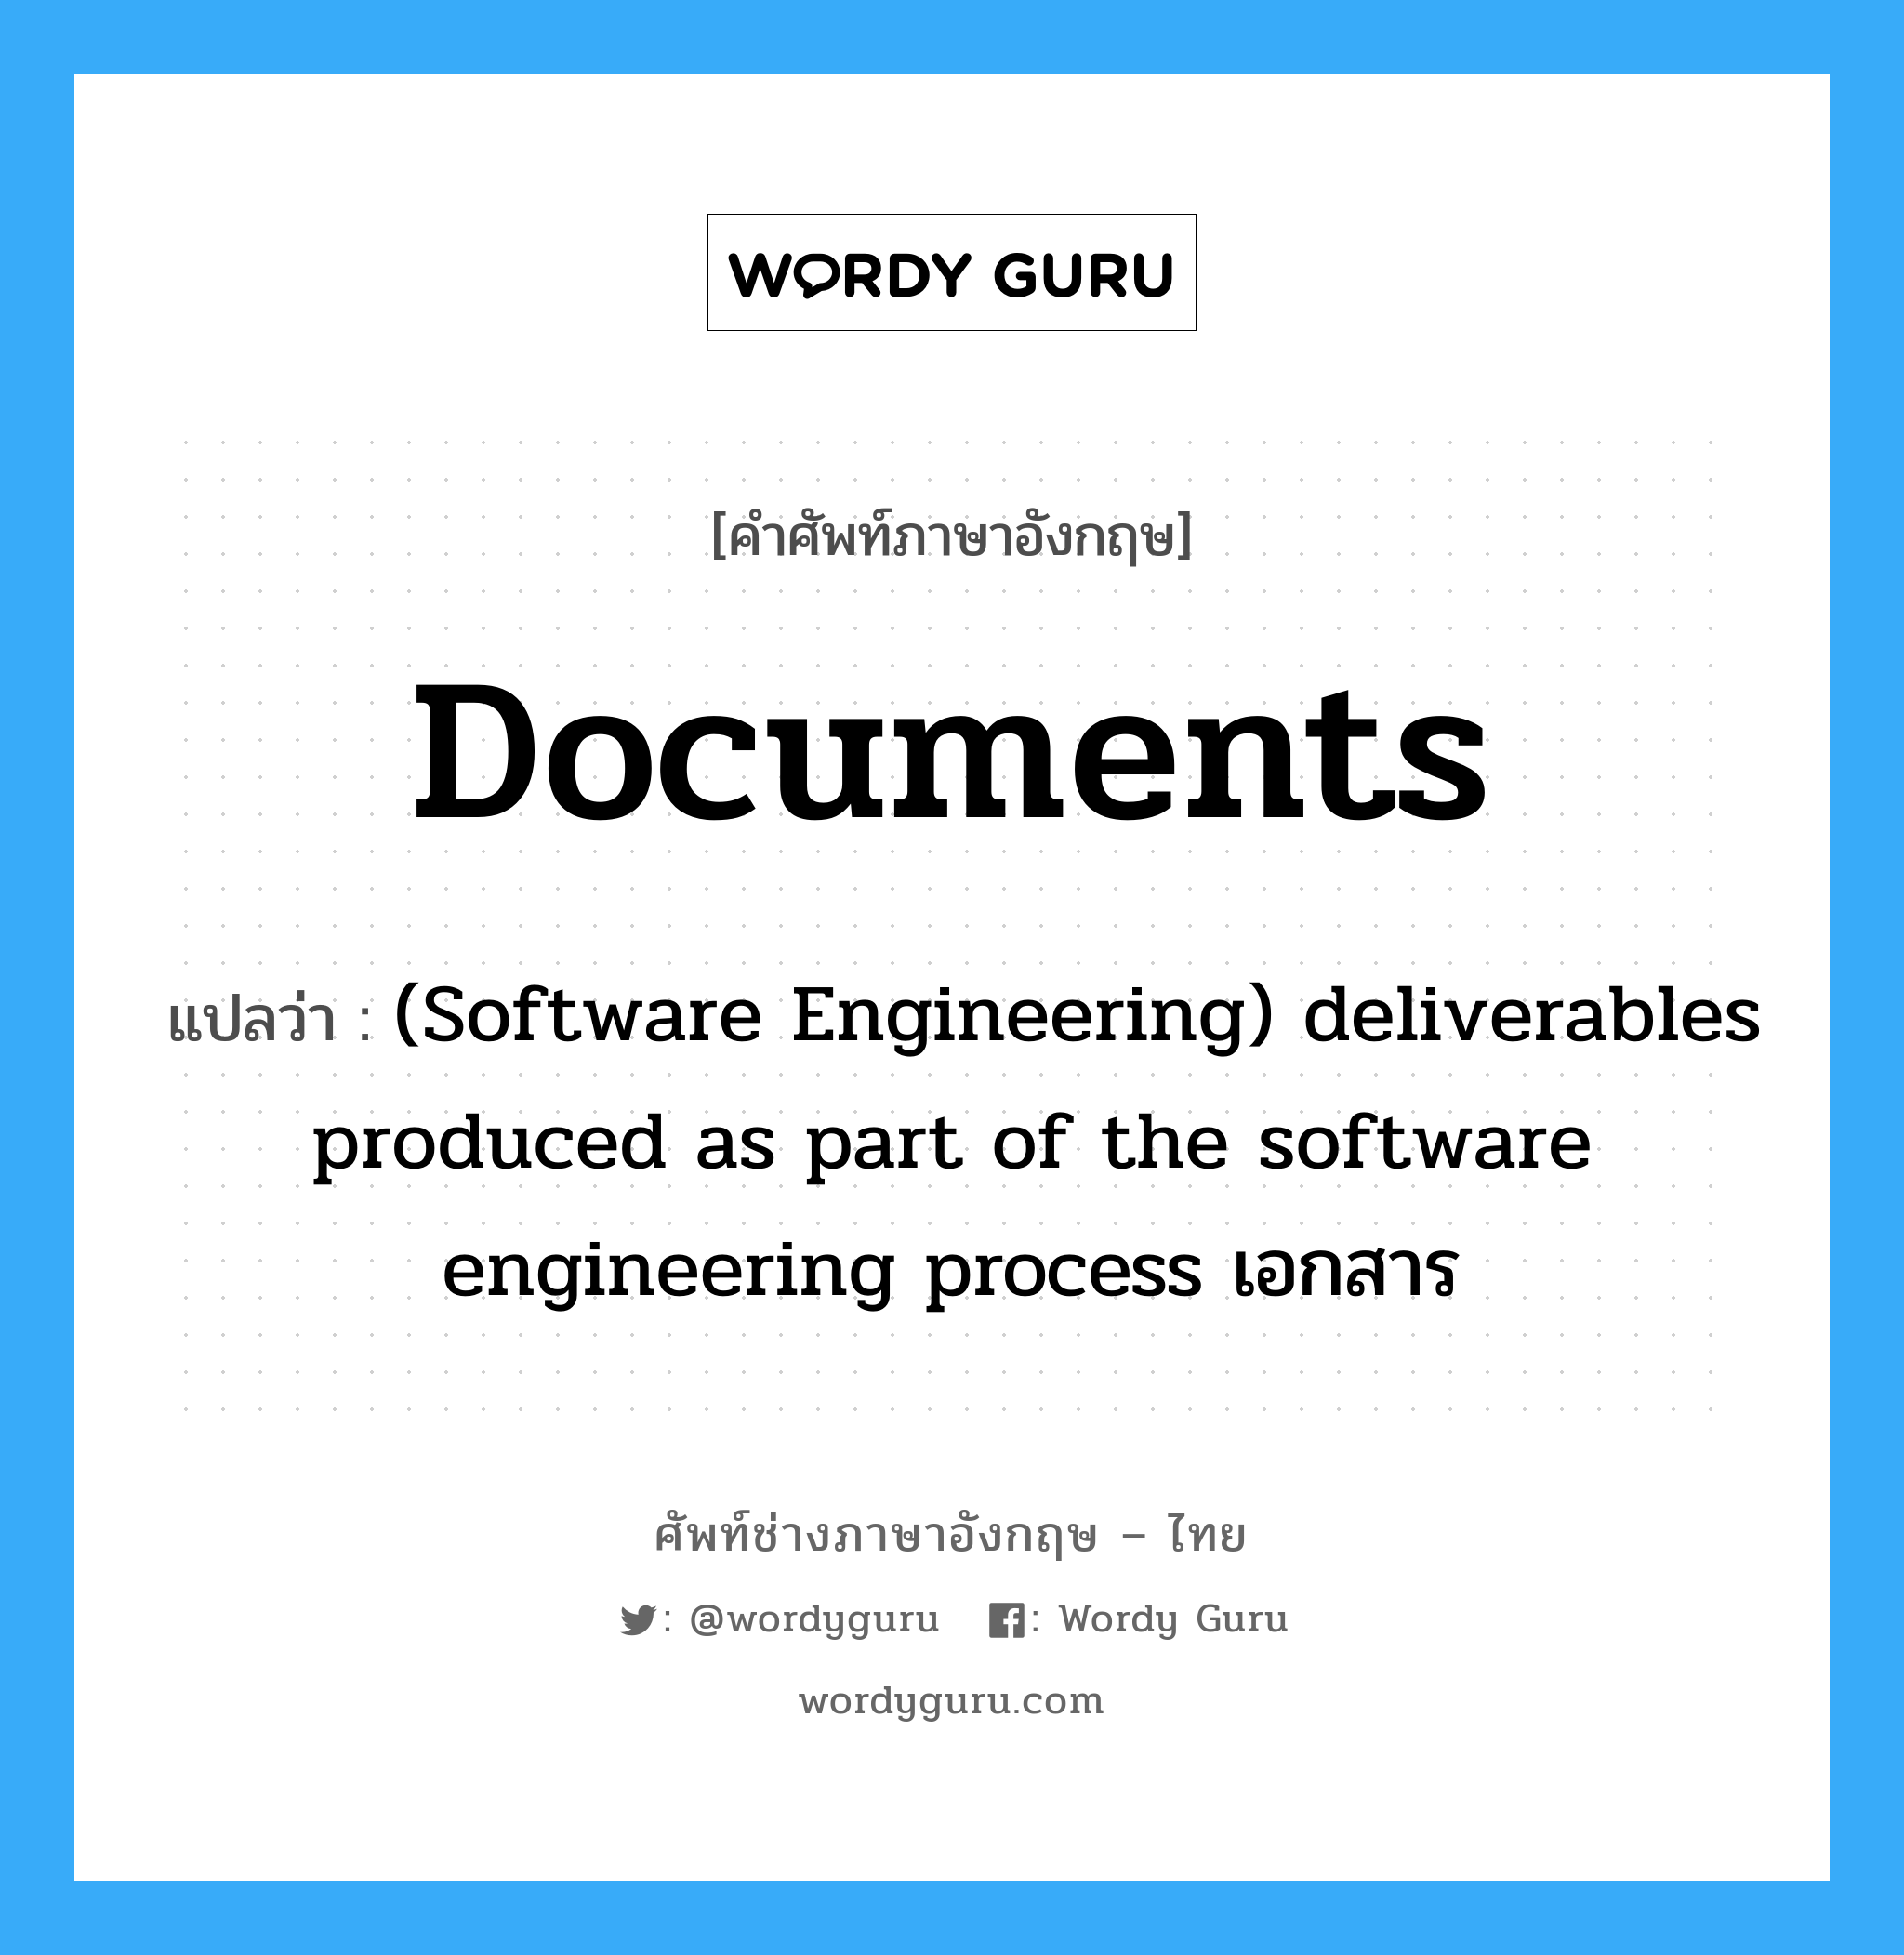 (Software Engineering) deliverables produced as part of the software engineering process เอกสาร ภาษาอังกฤษ?, คำศัพท์ช่างภาษาอังกฤษ - ไทย (Software Engineering) deliverables produced as part of the software engineering process เอกสาร คำศัพท์ภาษาอังกฤษ (Software Engineering) deliverables produced as part of the software engineering process เอกสาร แปลว่า Documents